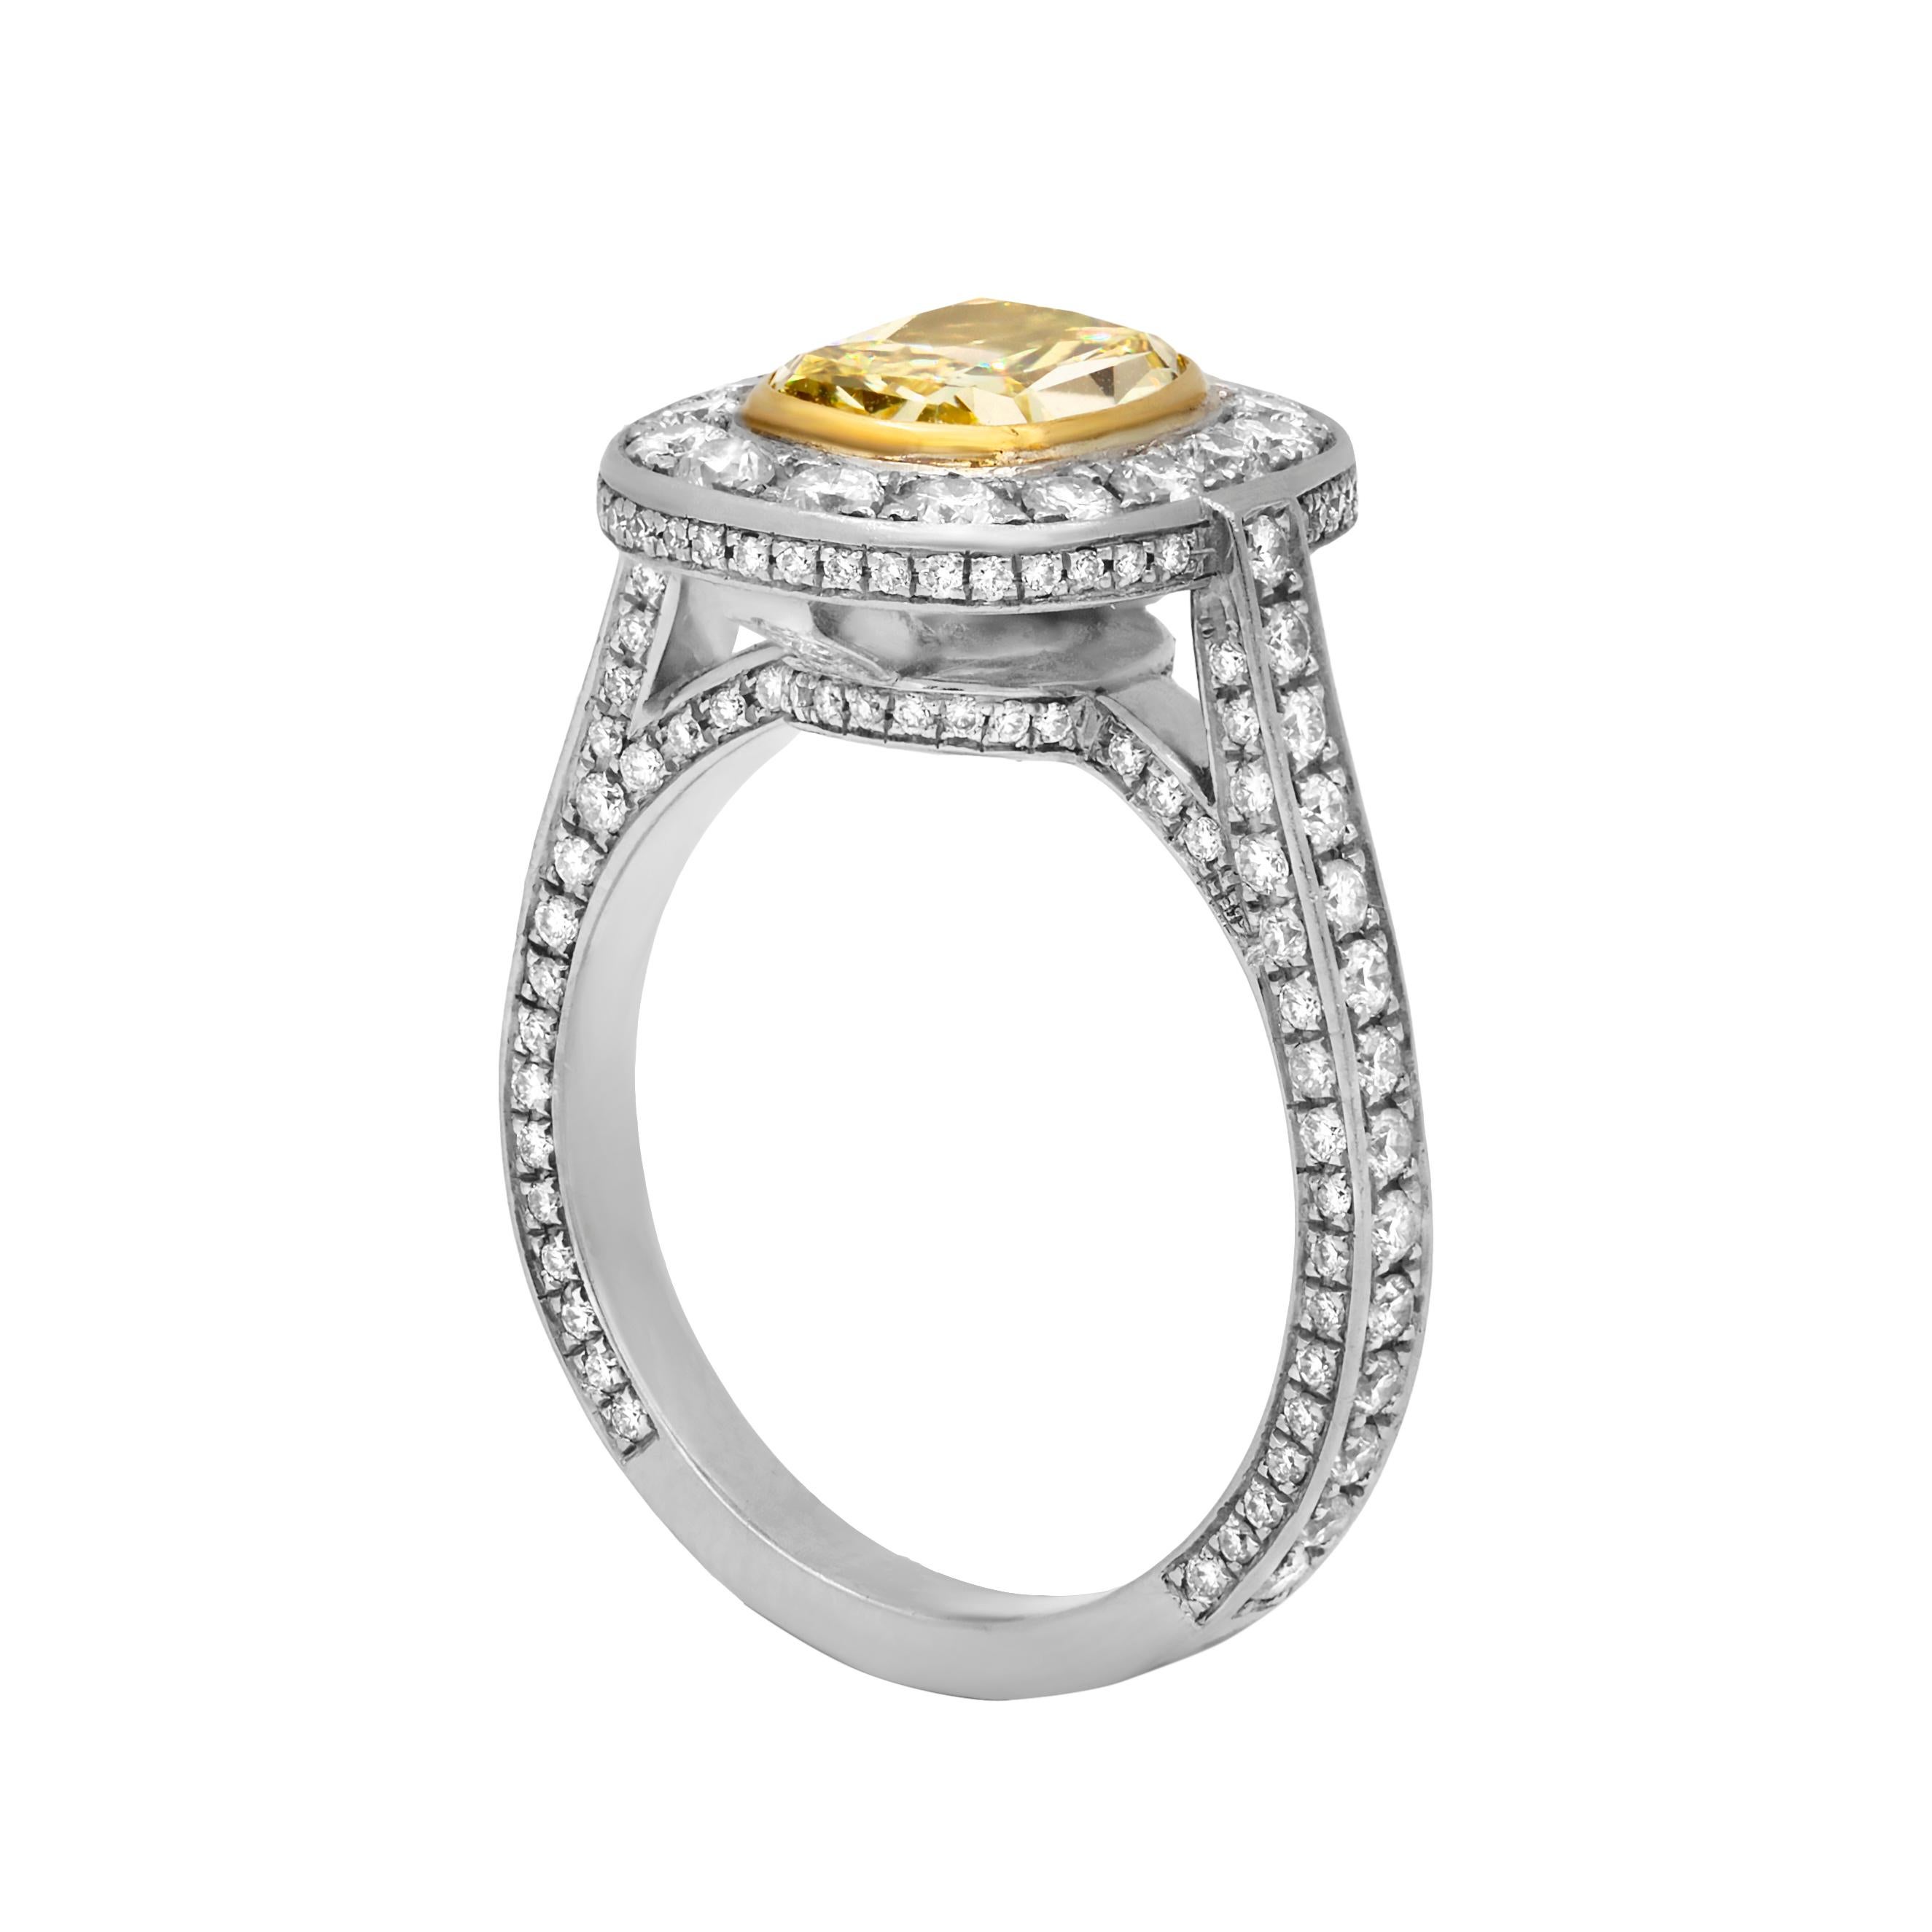 Platinum and 18K yellow gold engagement ring with 1.67 ct fancy intense yellow diamond with VS1 clarity and 1.31 carats of white diamonds going around the halo and band. GIA Certified 
Finger-size 6 